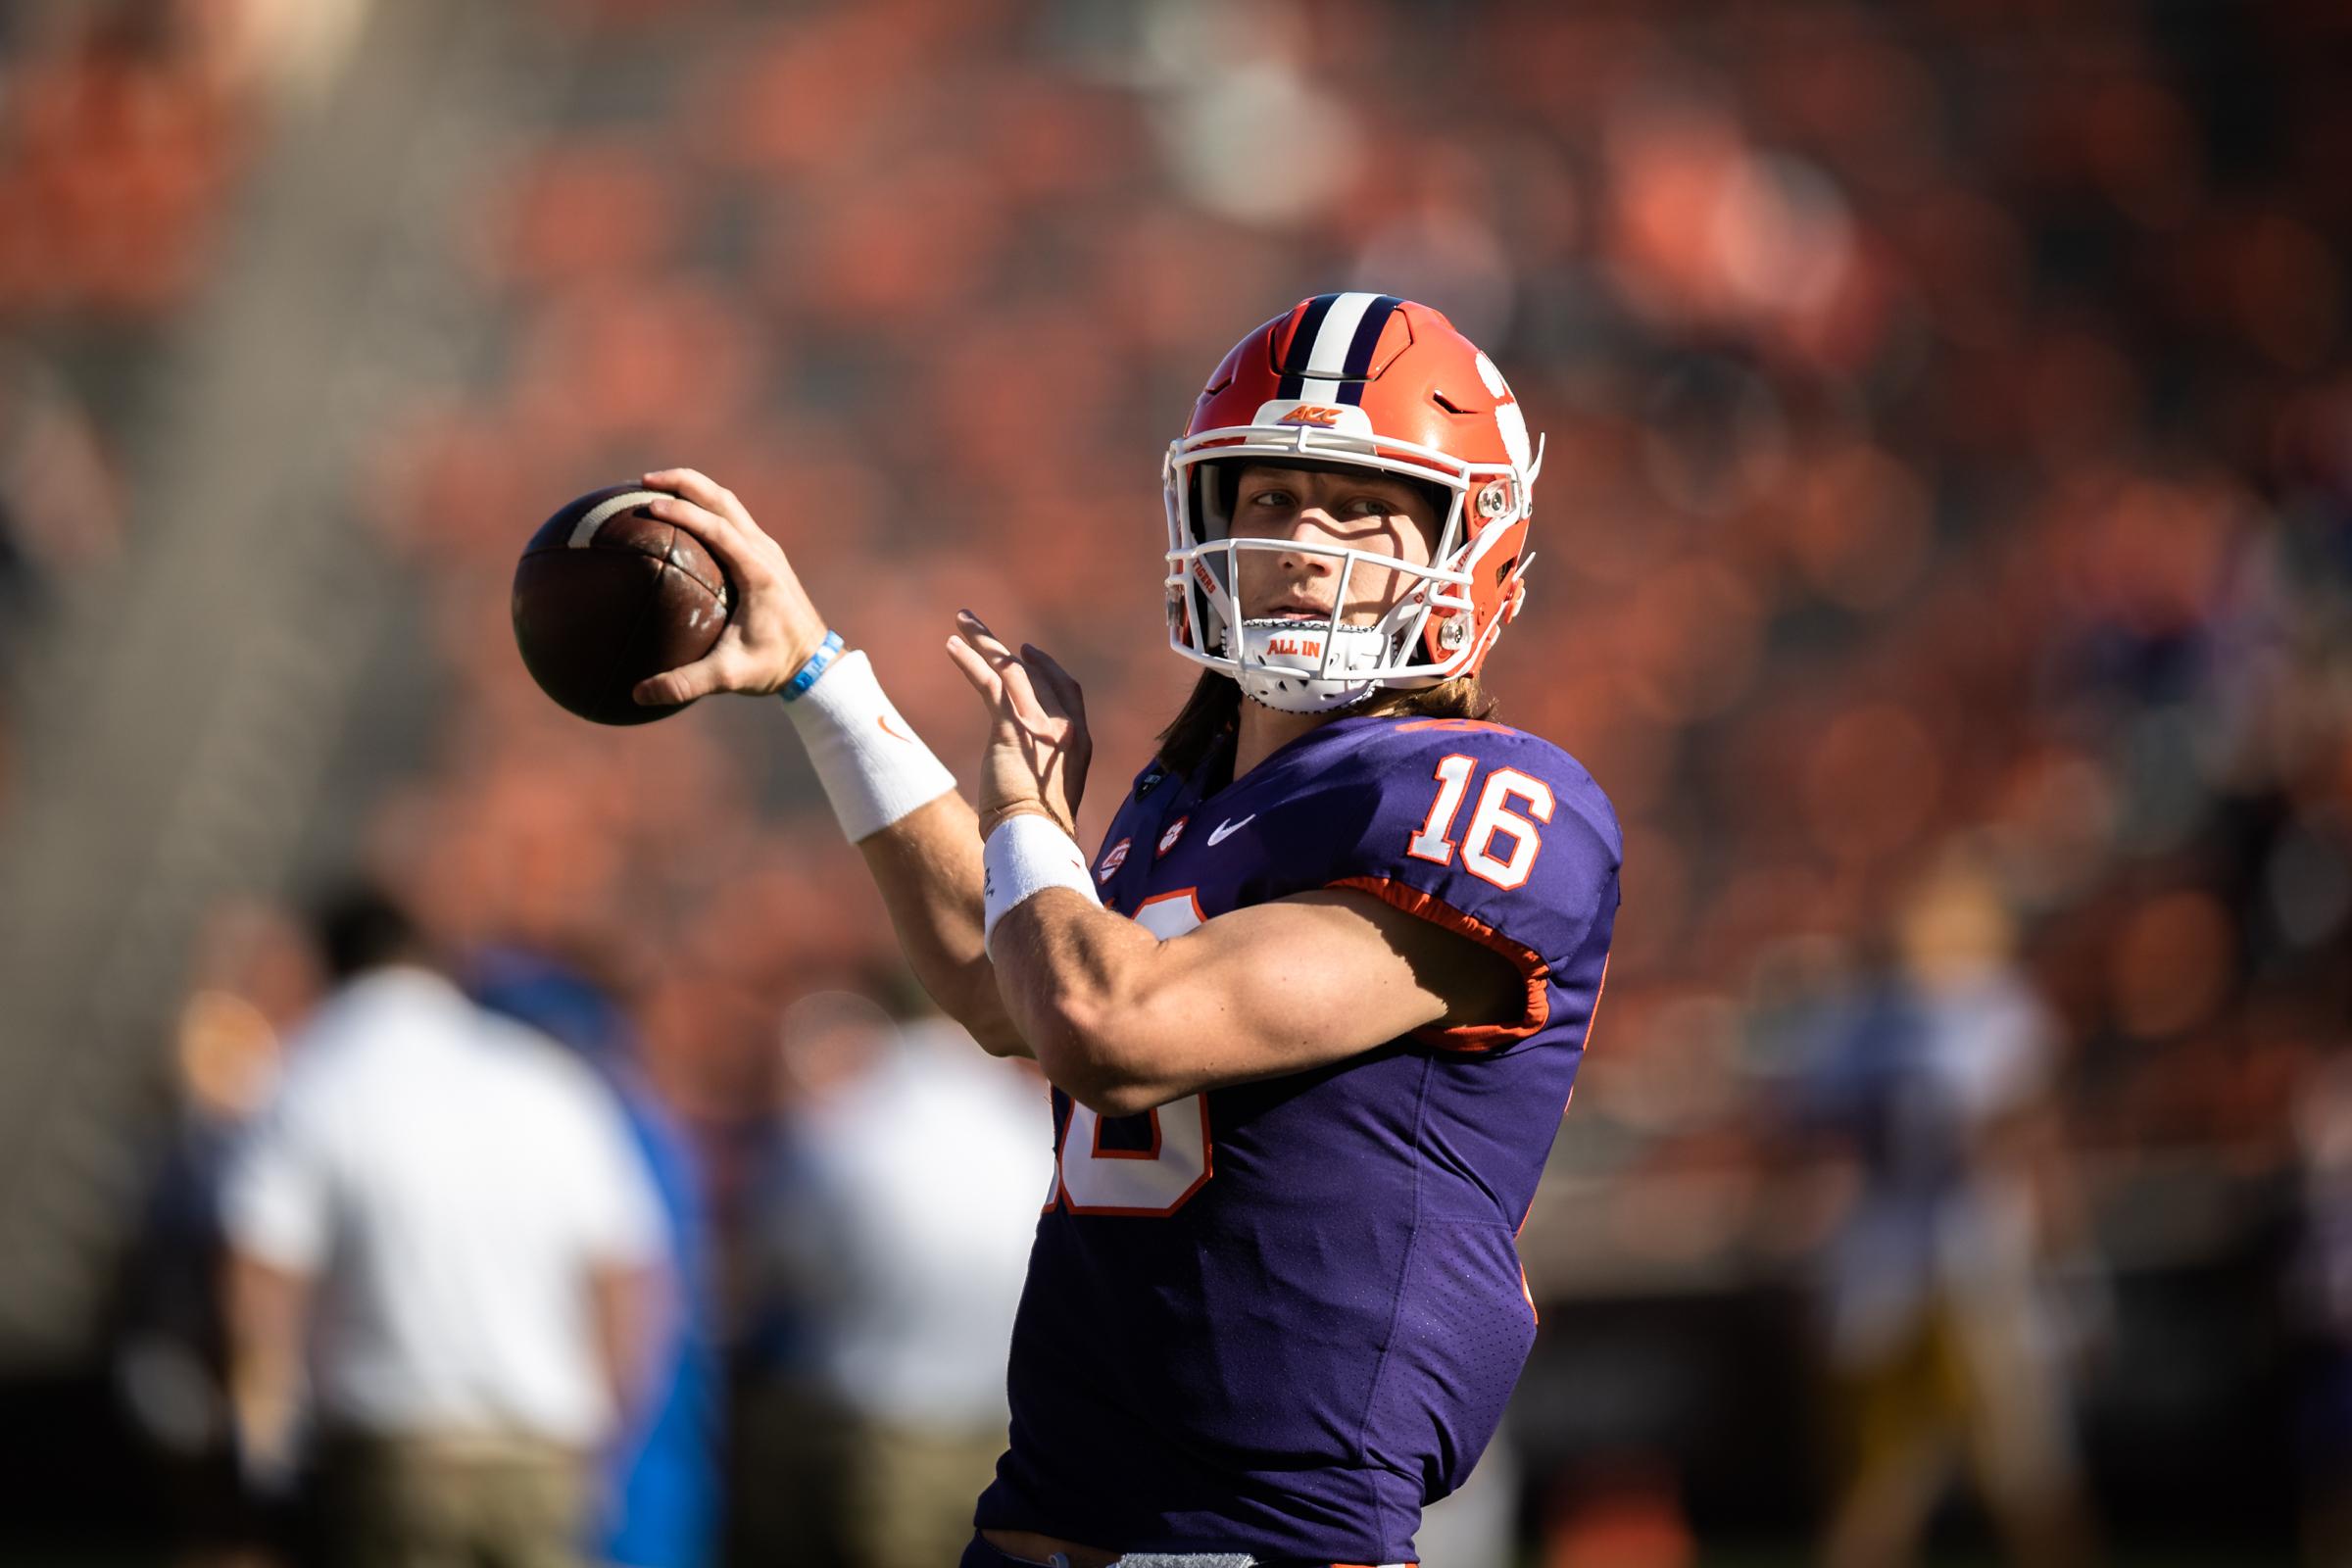 Nov 28, 2020; Clemson, SC, USA; Clemson quarterback Trevor Lawrence (16) warms up with his team before the game against Pittsburgh at Memorial Stadium / Ken Ruinard-USA TODAY Sports